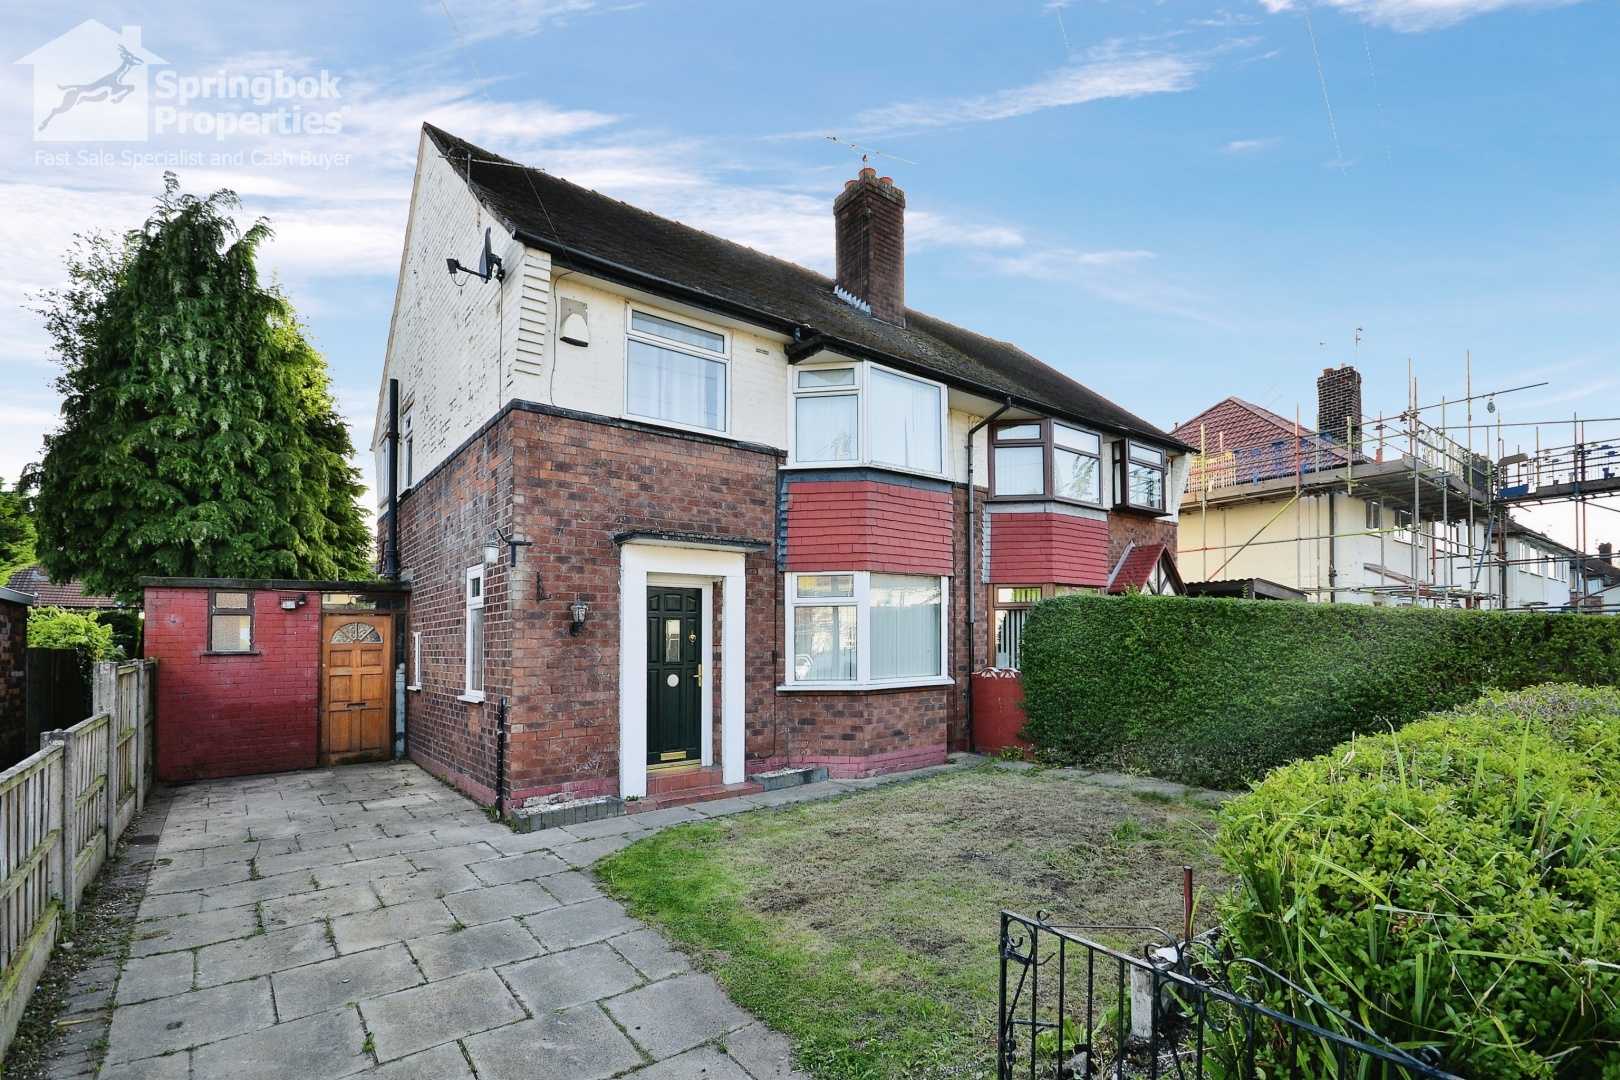 House in Cheadle Hulme, Stockport 12147508